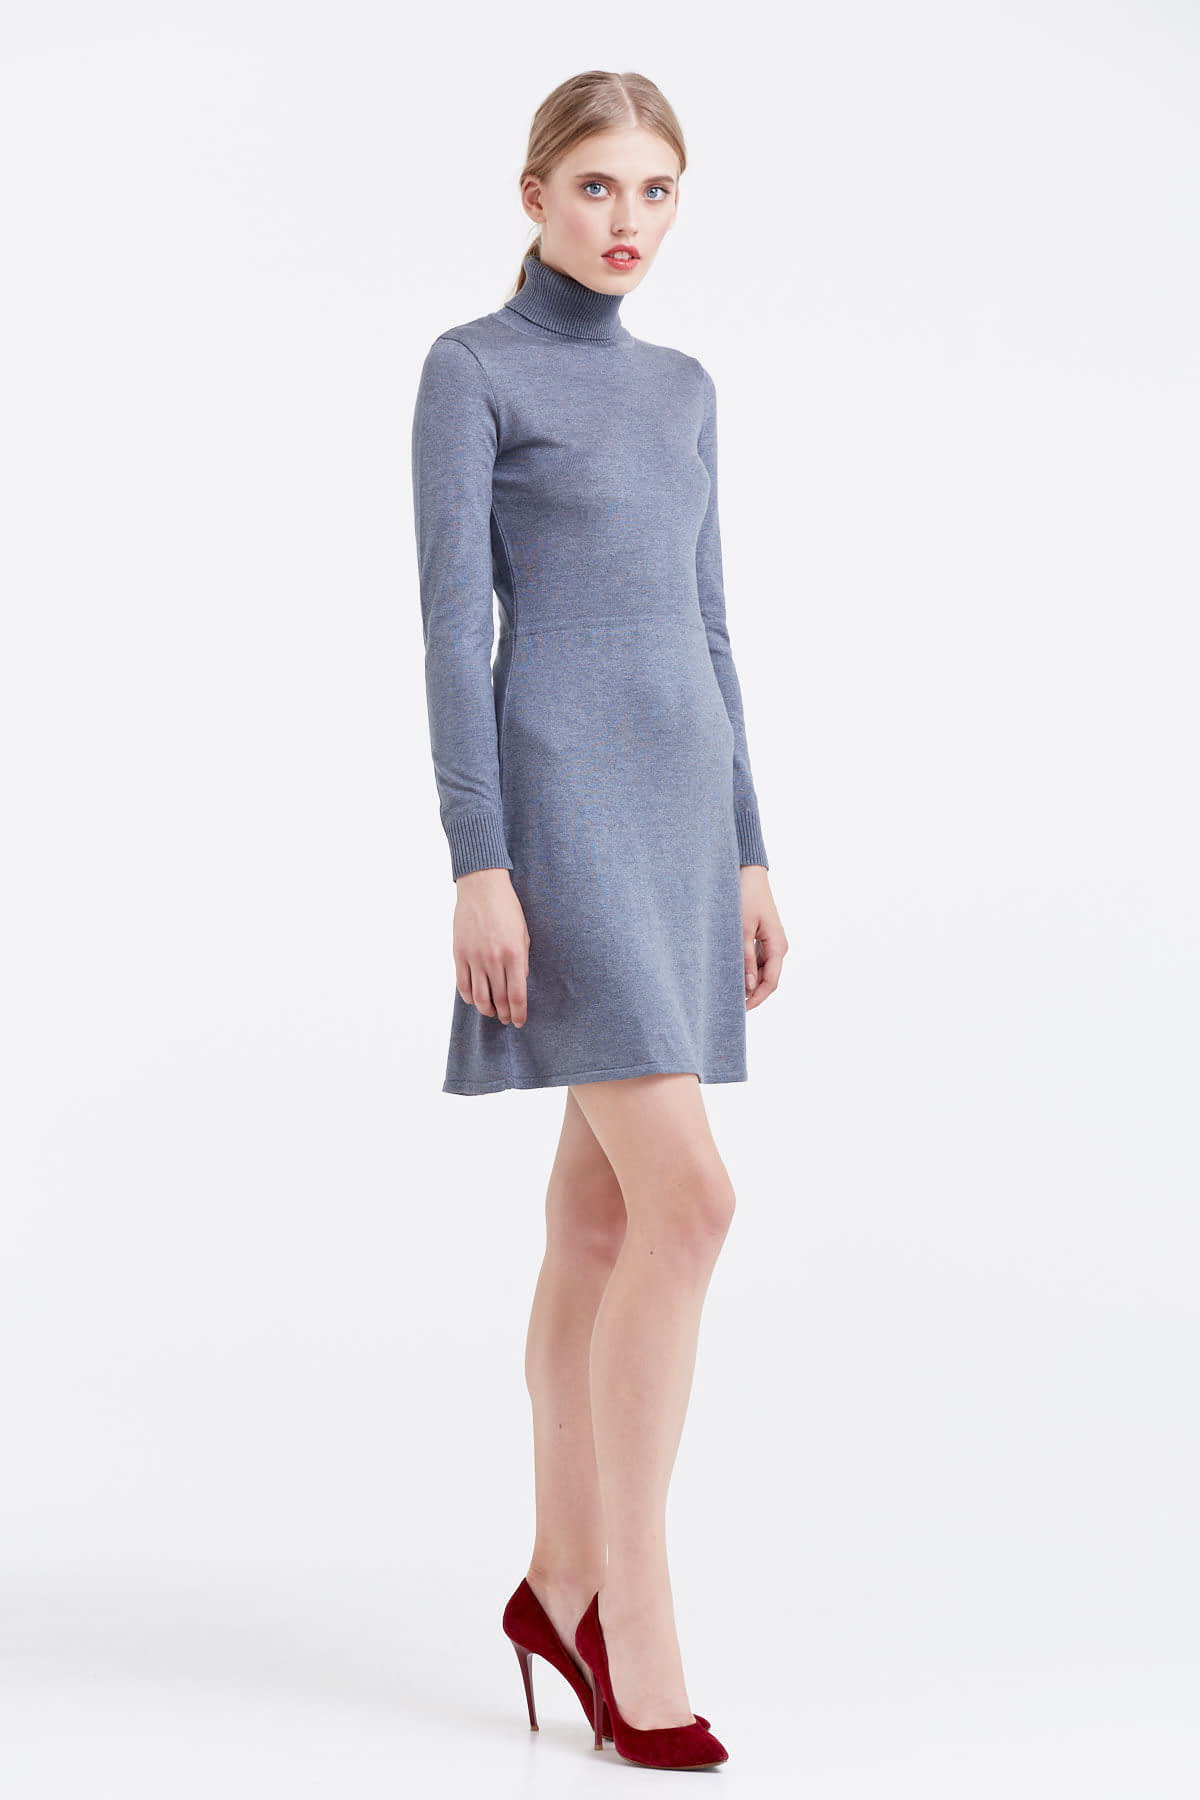 Grey knitted dress , photo 5